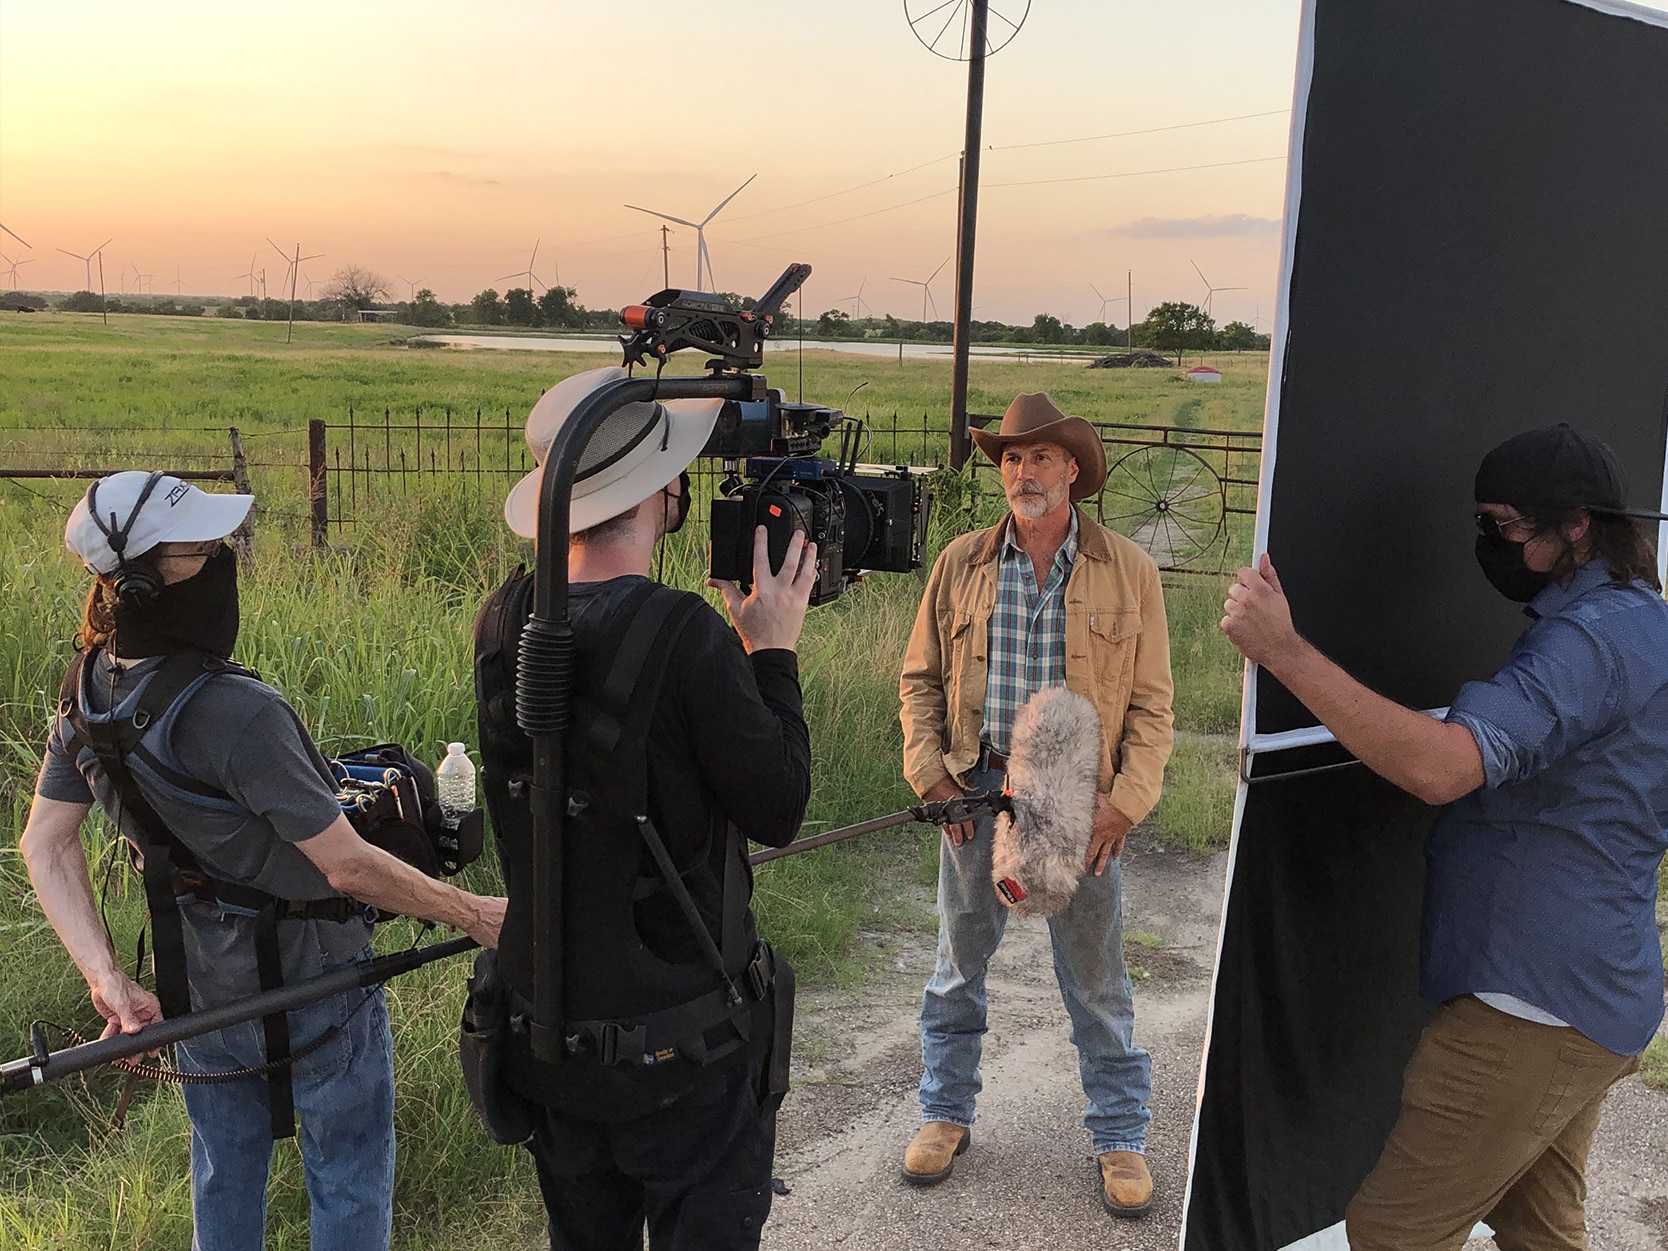 Man on a farm with a cowboy hat being filmed by a professional video production crew.